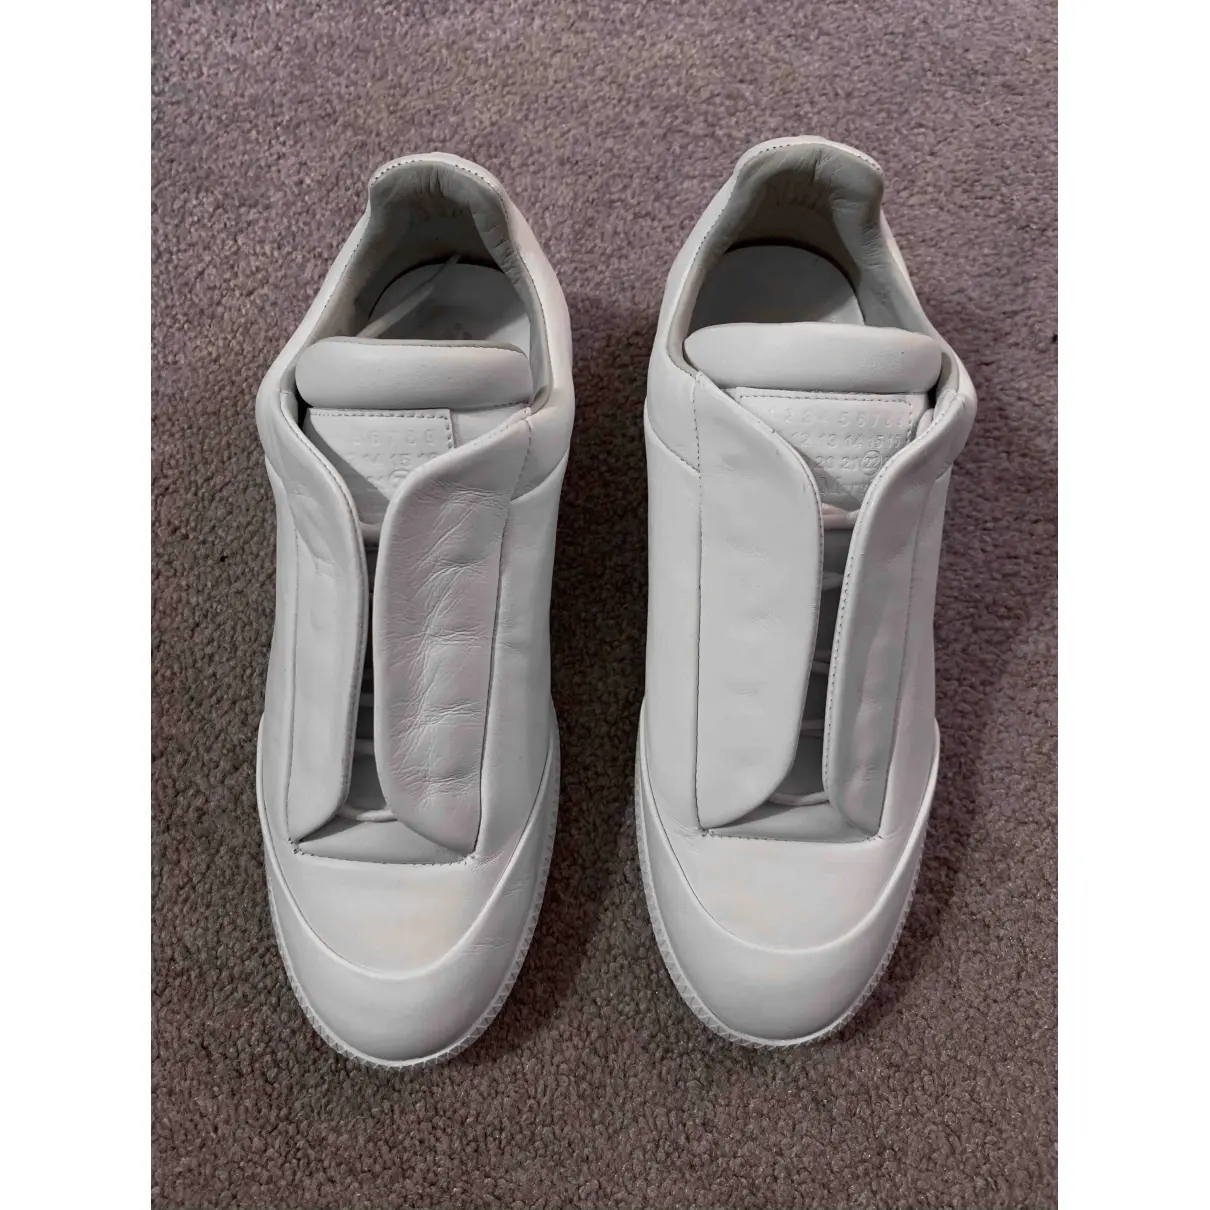 Buy Maison Martin Margiela Future leather low trainers online